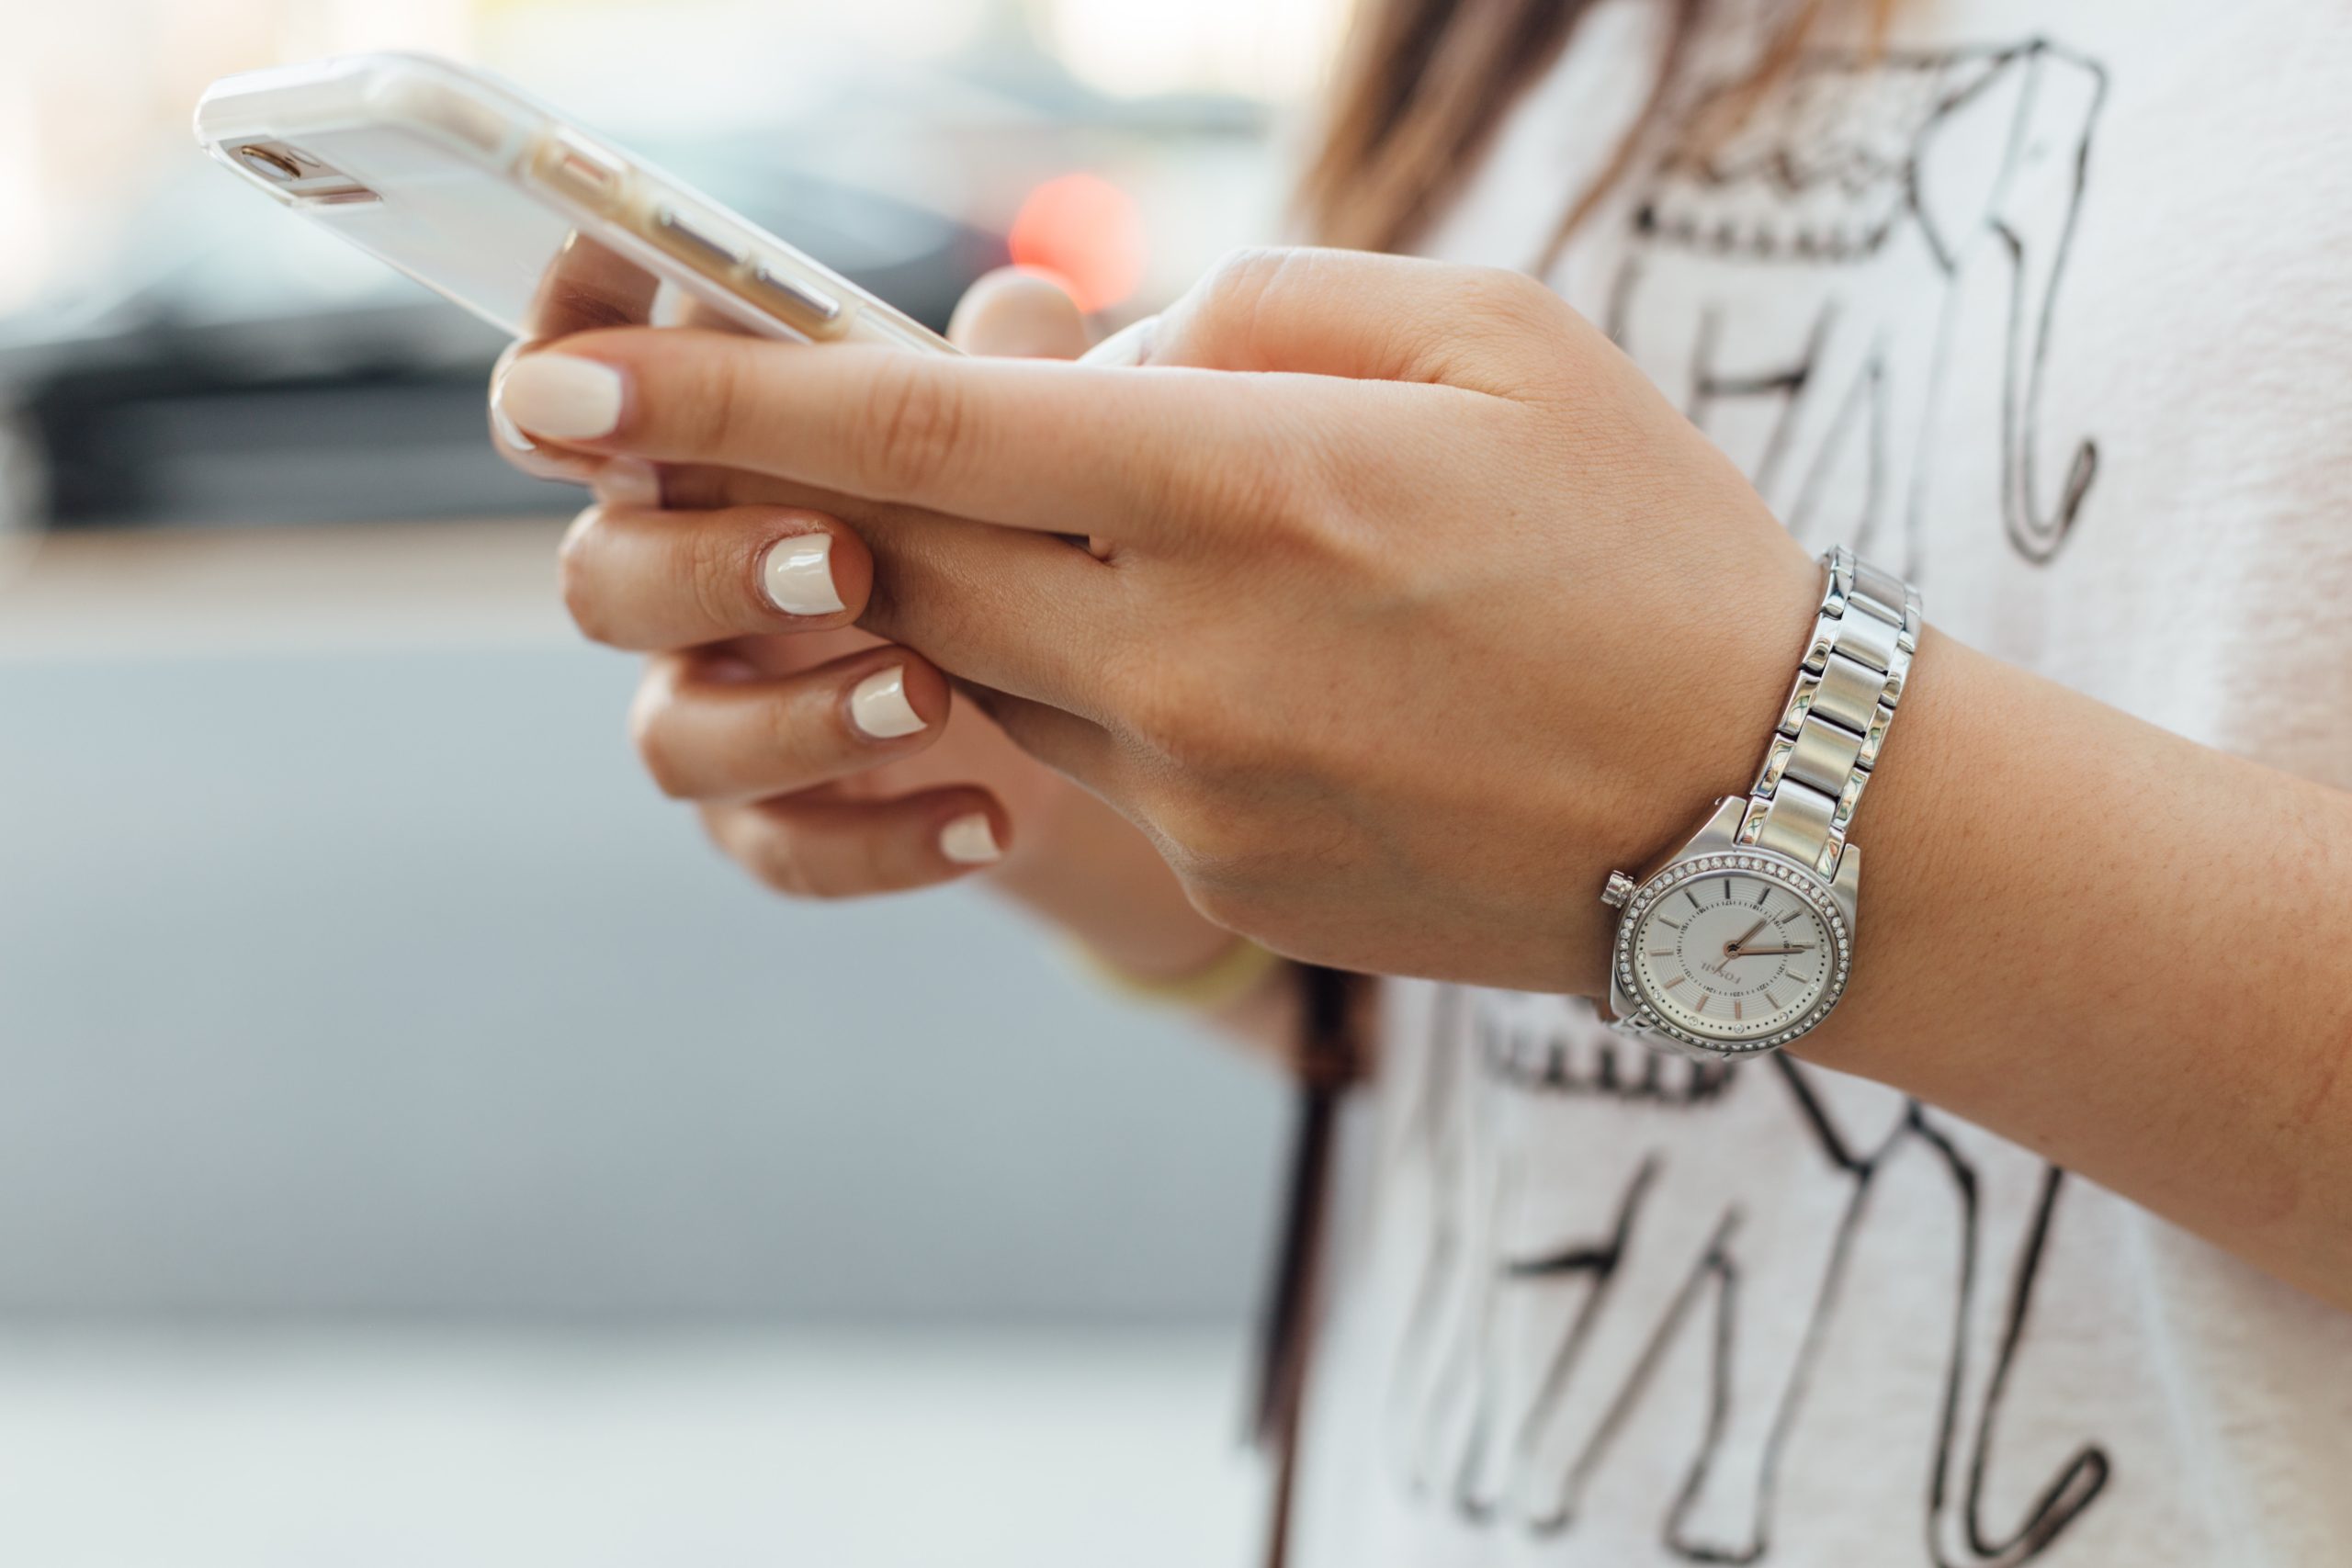 Girl in white shirt, white nailpaint, holding a smartphone in hands.